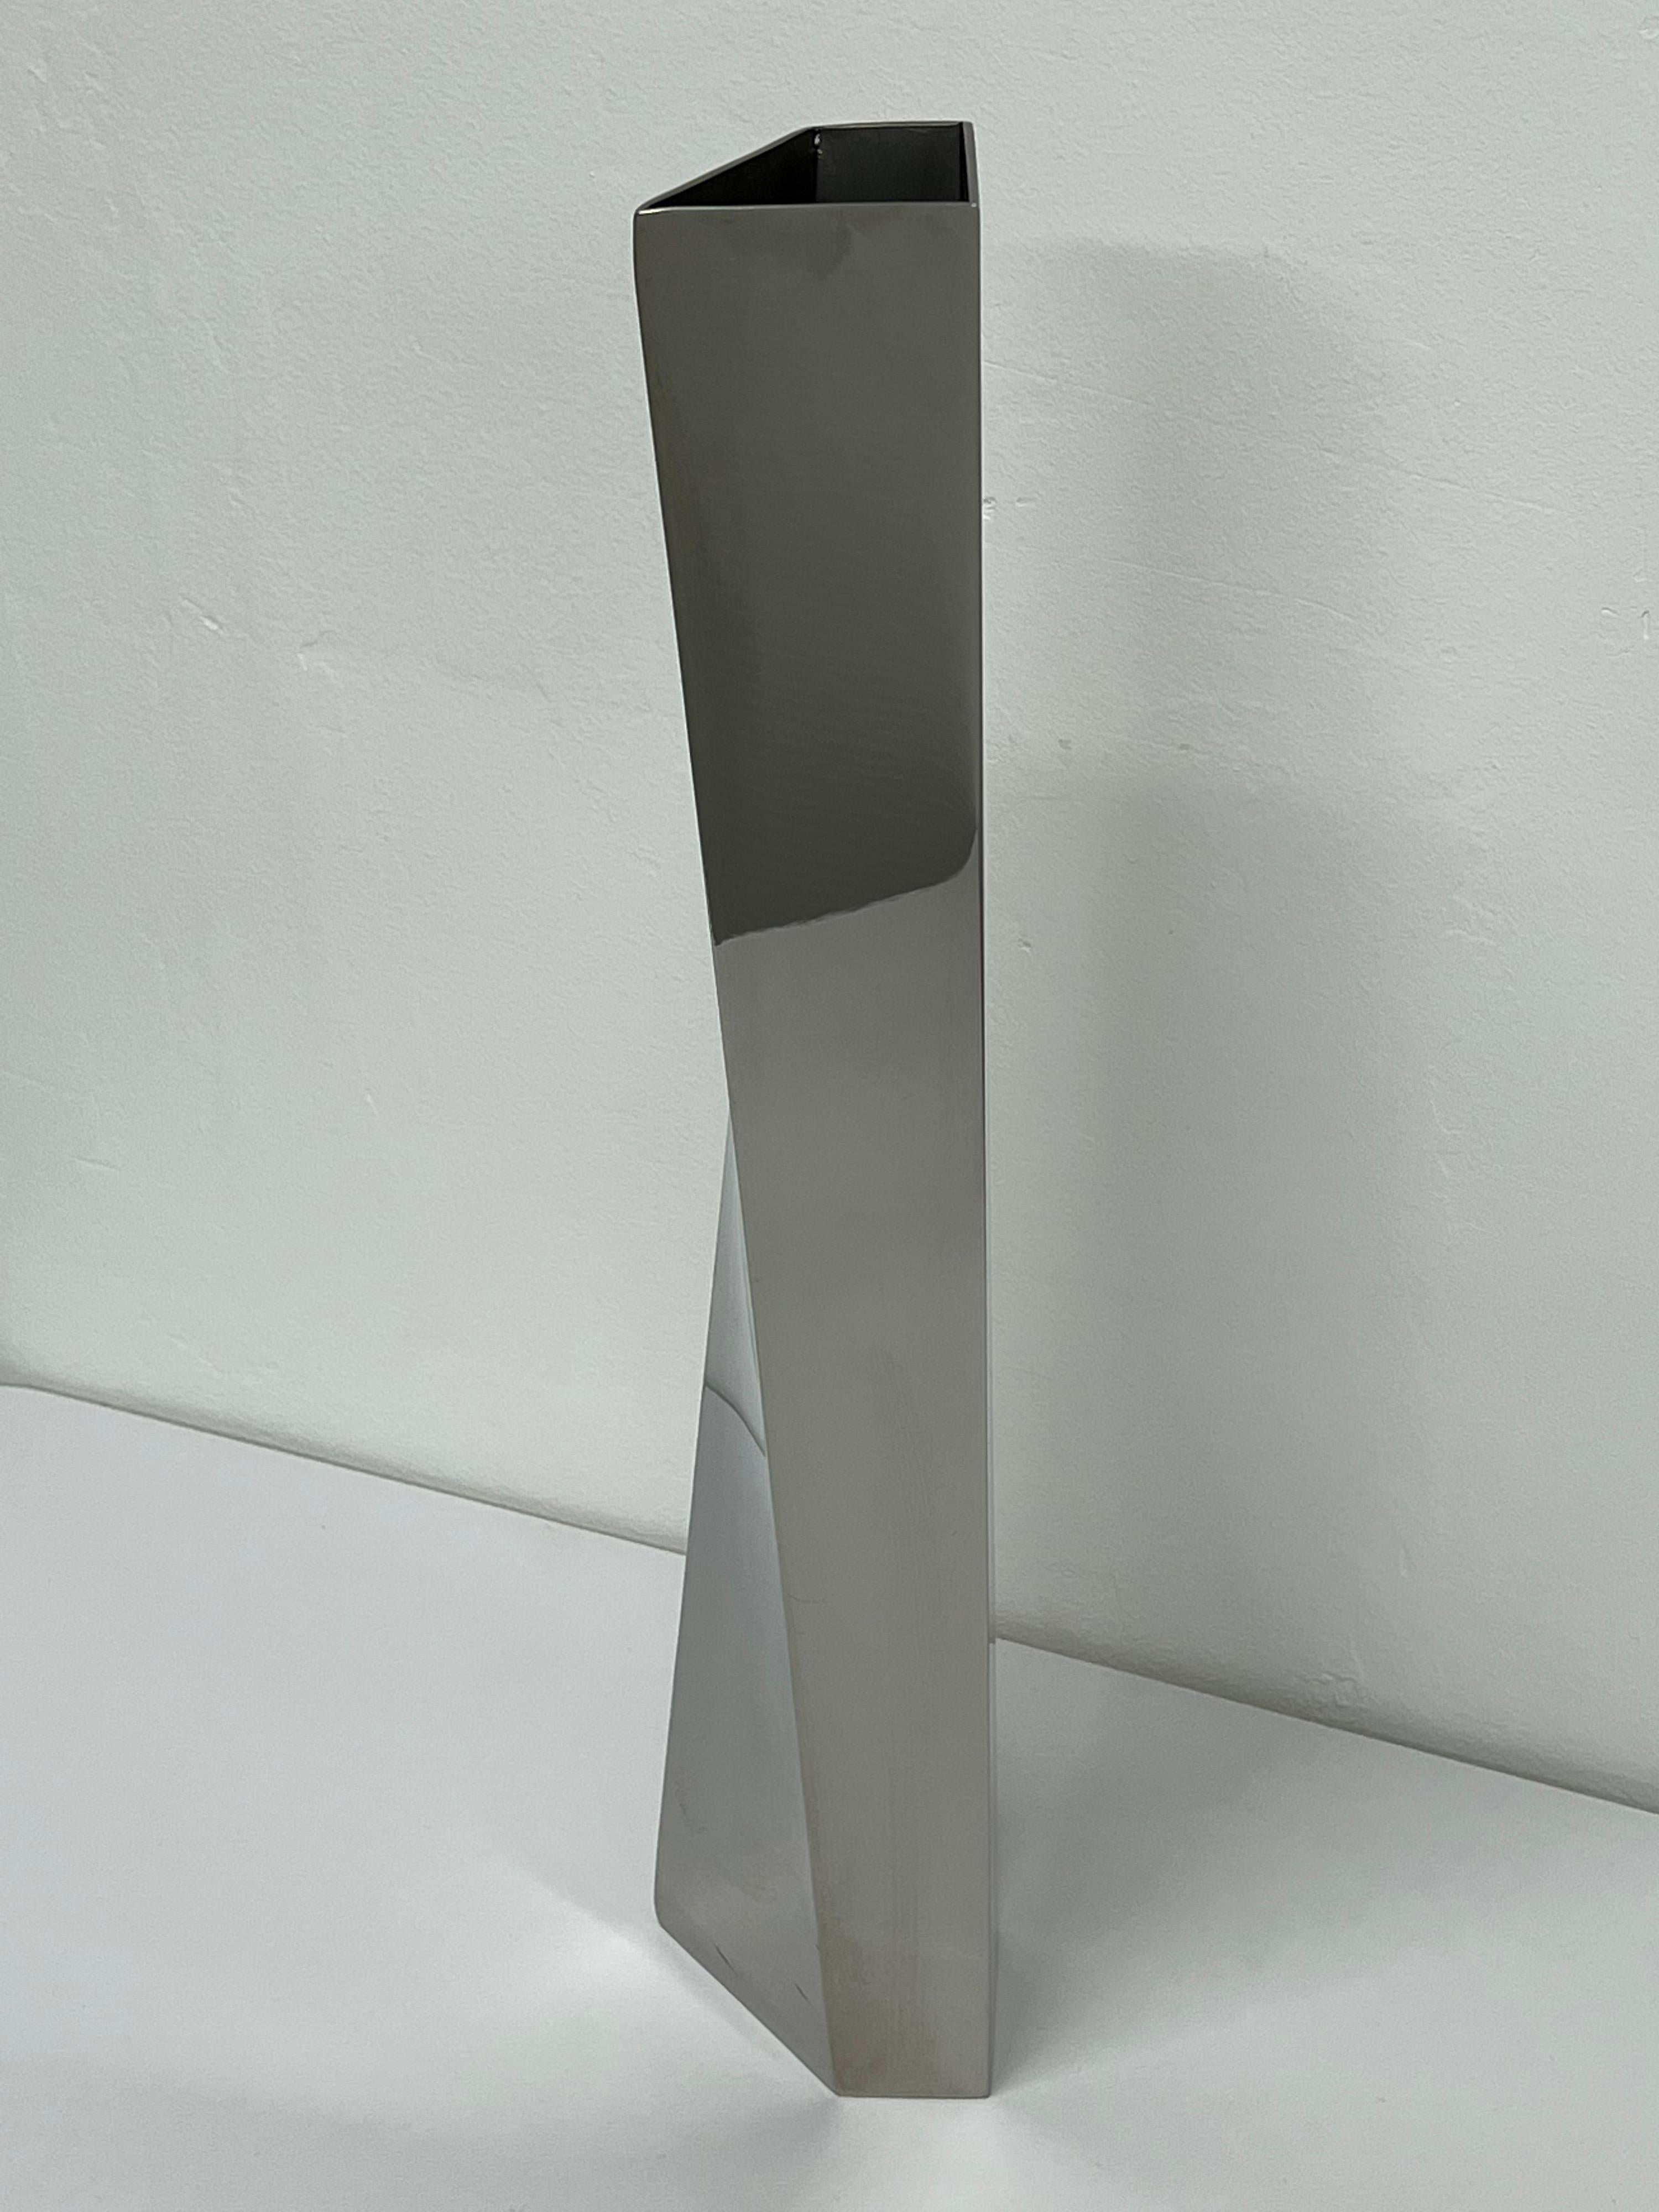 Zaha Hadid Crevasse flower vase for Alessi, 2005.

A vase cut from a single block of steel and scored along two diagonal lines, Crevasse by Zaha Hadid for Alessi creates a warped, inverted surface. With a force similar to that of an arctic